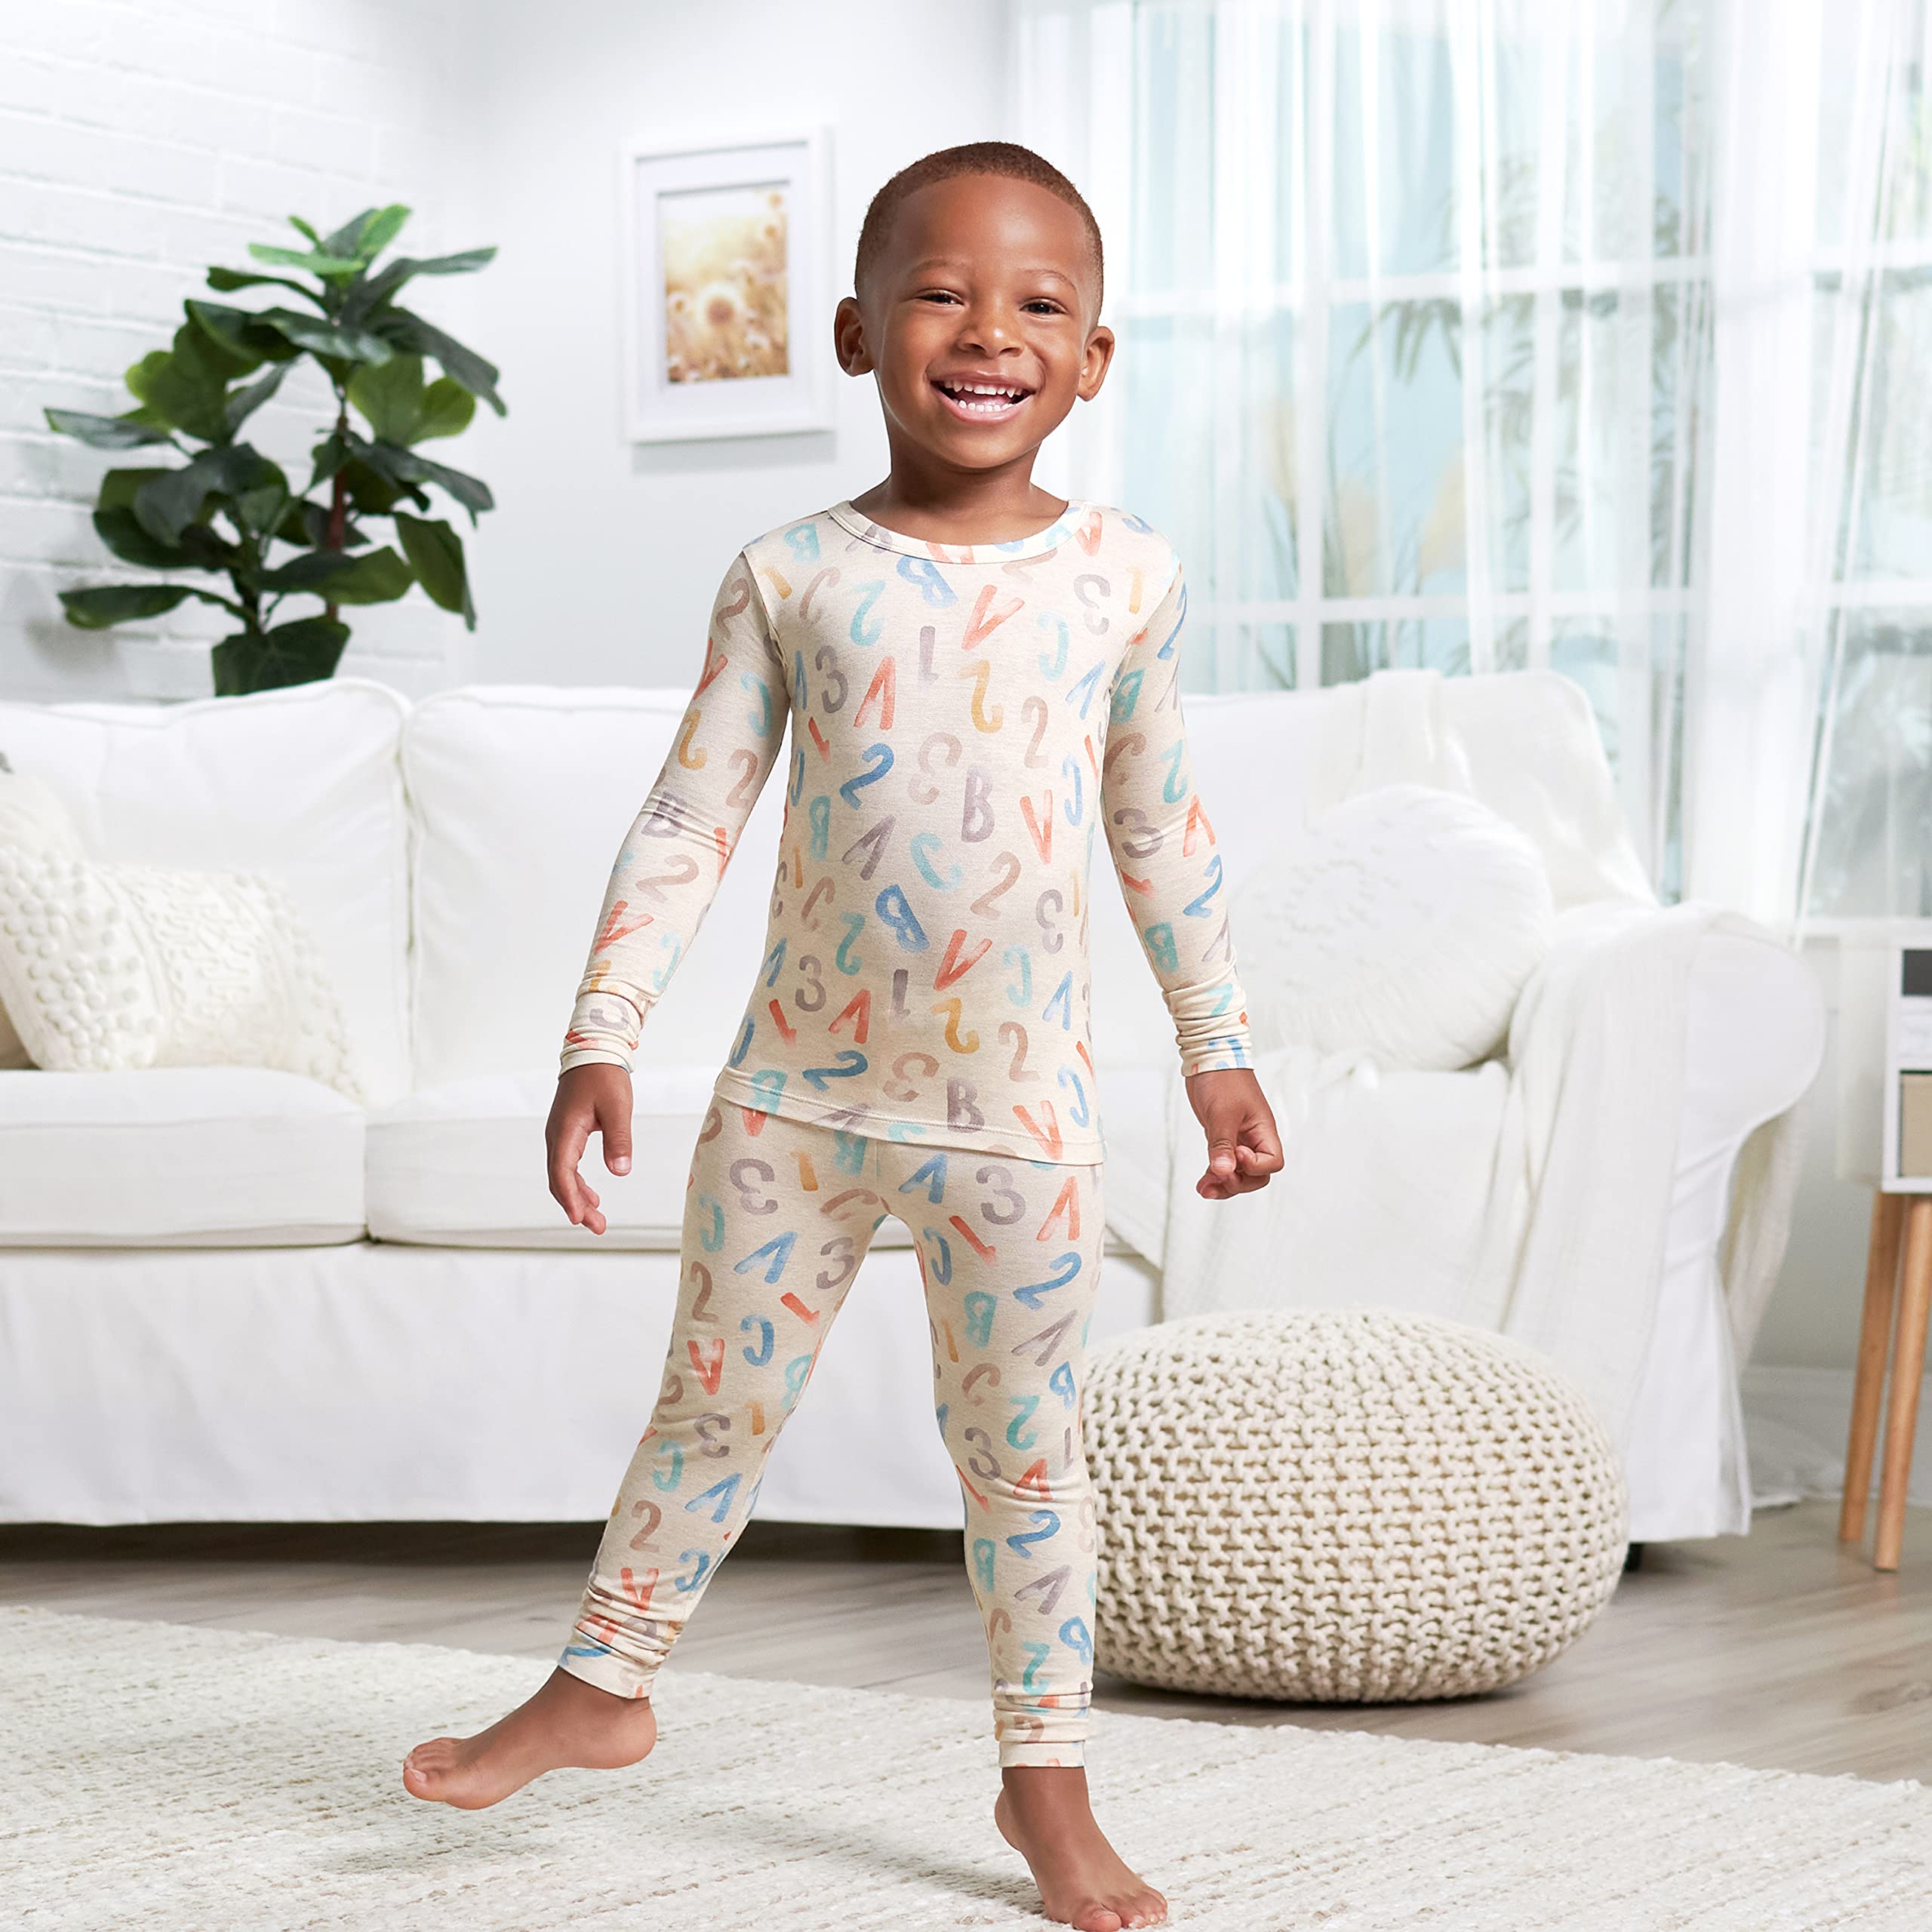 Gerber Unisex Baby Toddler Buttery Soft 2-Piece Snug Fit Pajamas with Viscose Made from Eucalyptus